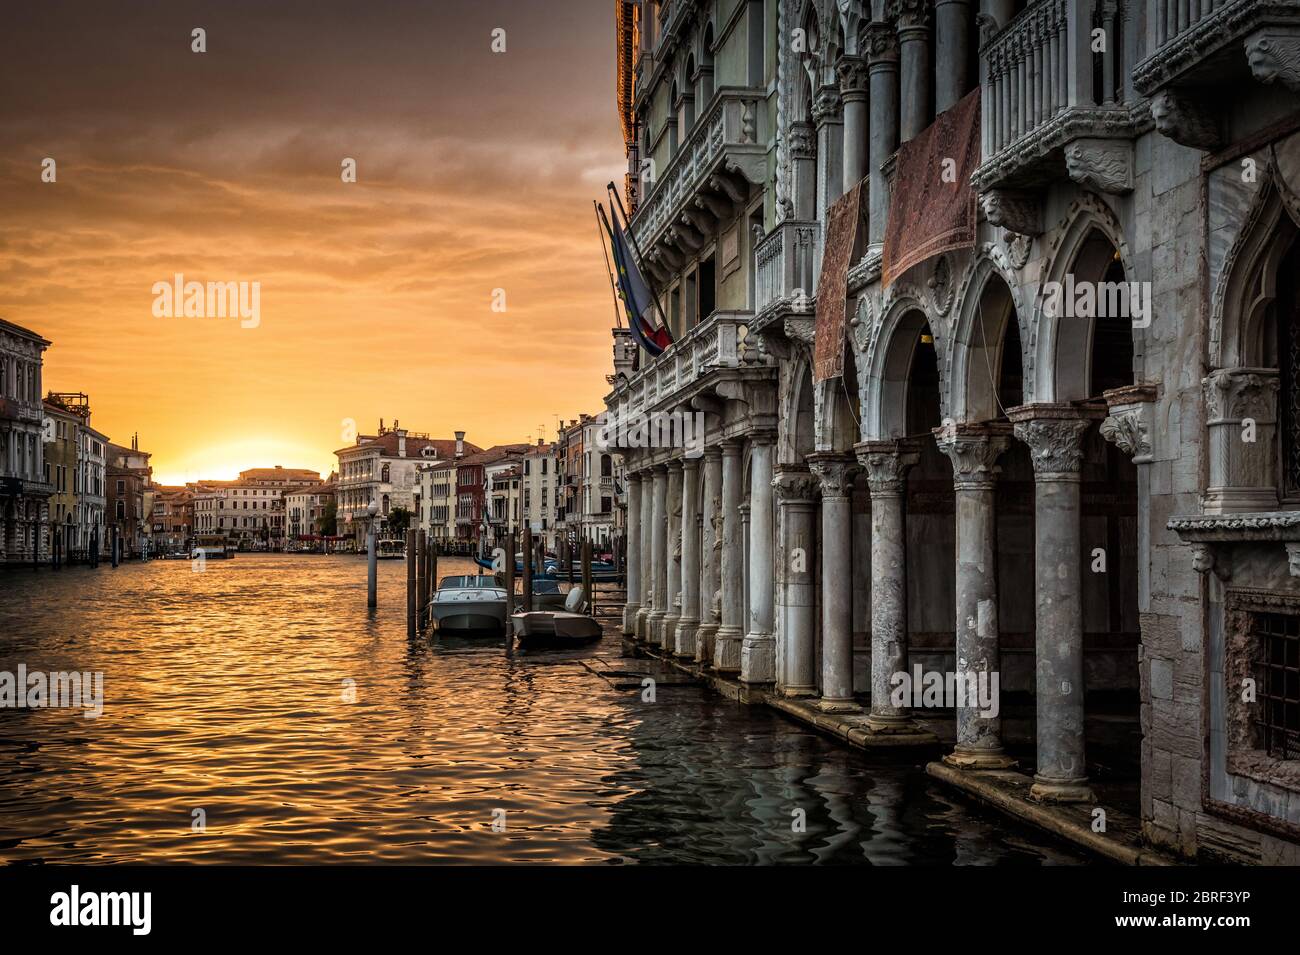 Grand Canal with Ca' d'Oro palace at sunset in Venice, Italy. Ca' d'Oro (Palazzo Santa Sofia) is one of the older palaces in Venice. Stock Photo